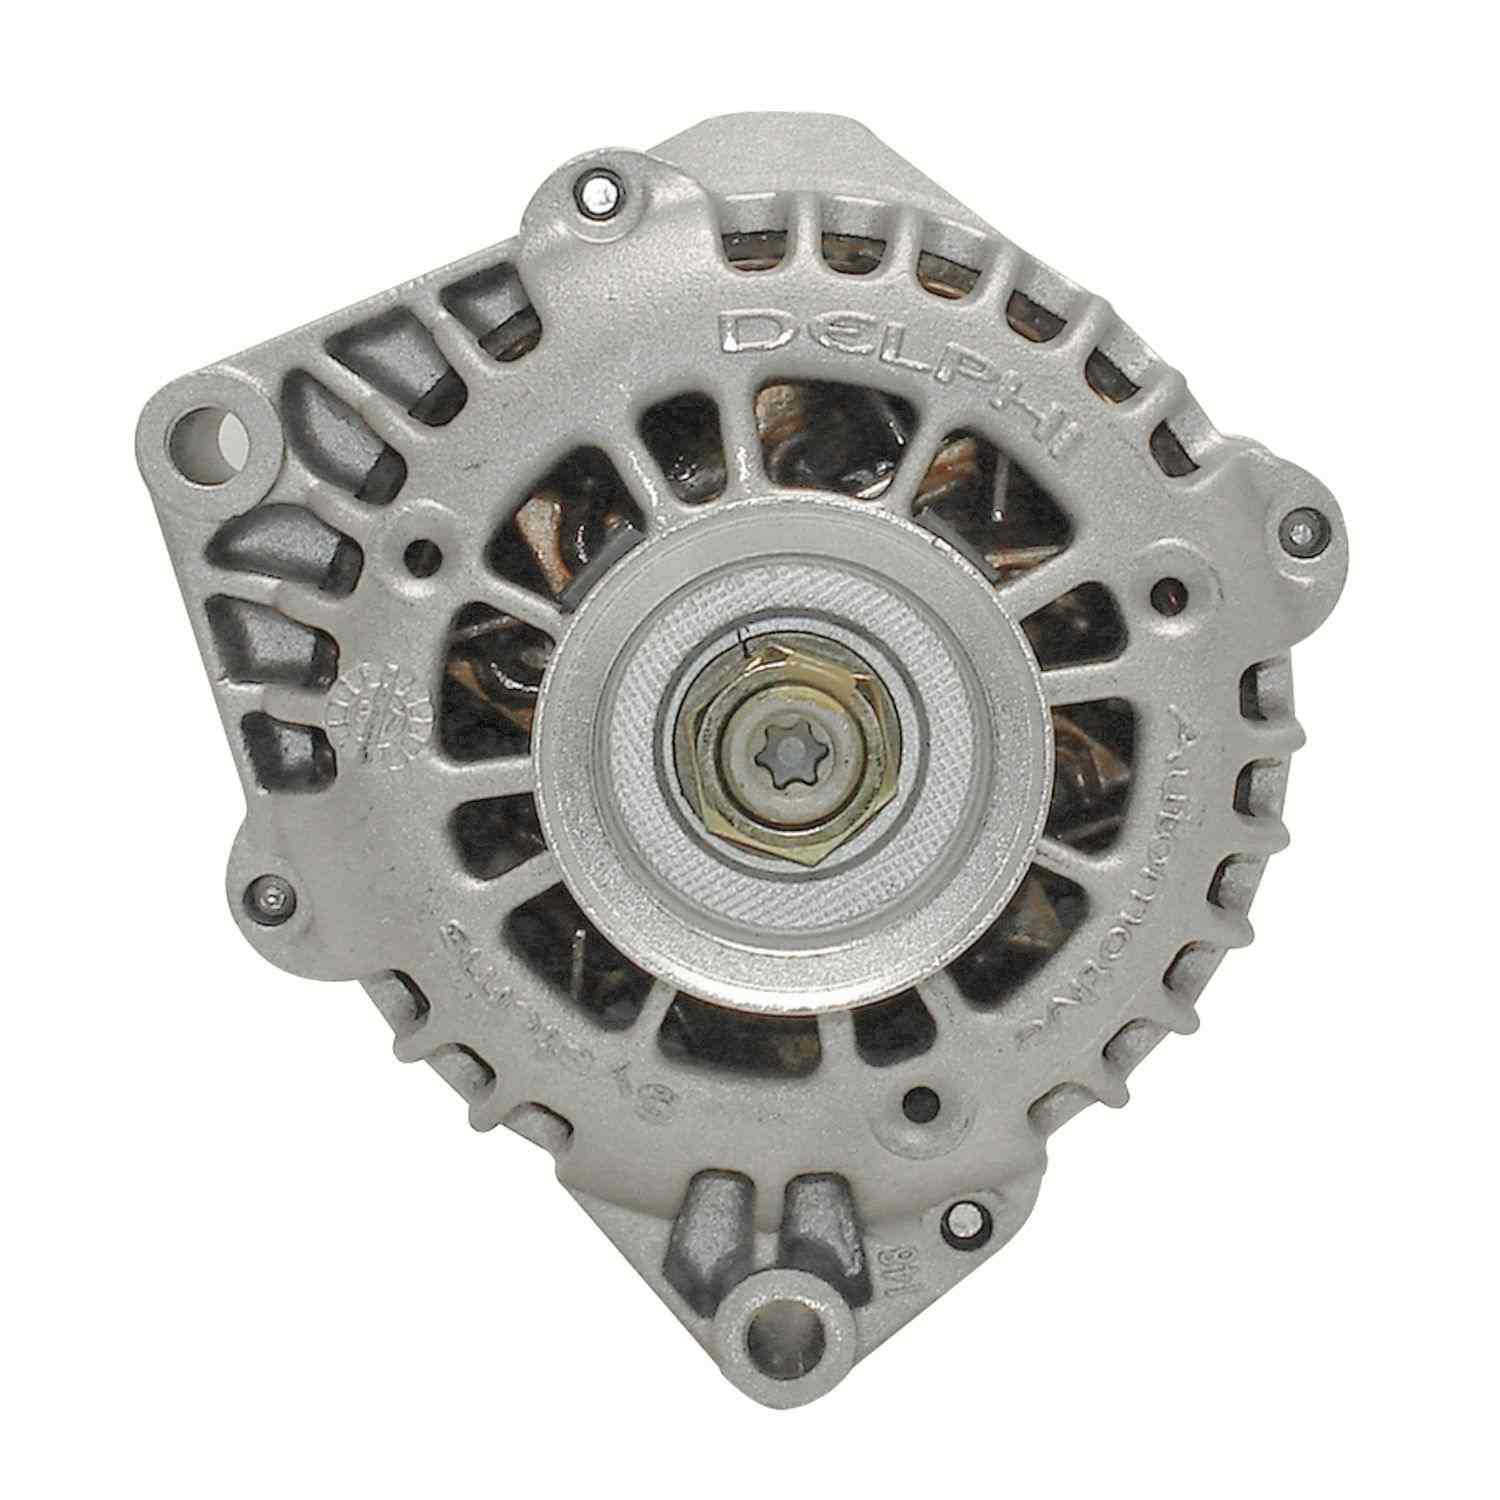 ACDELCO GOLD/PROFESSIONAL - Reman Alternator - DCC 334-2454A